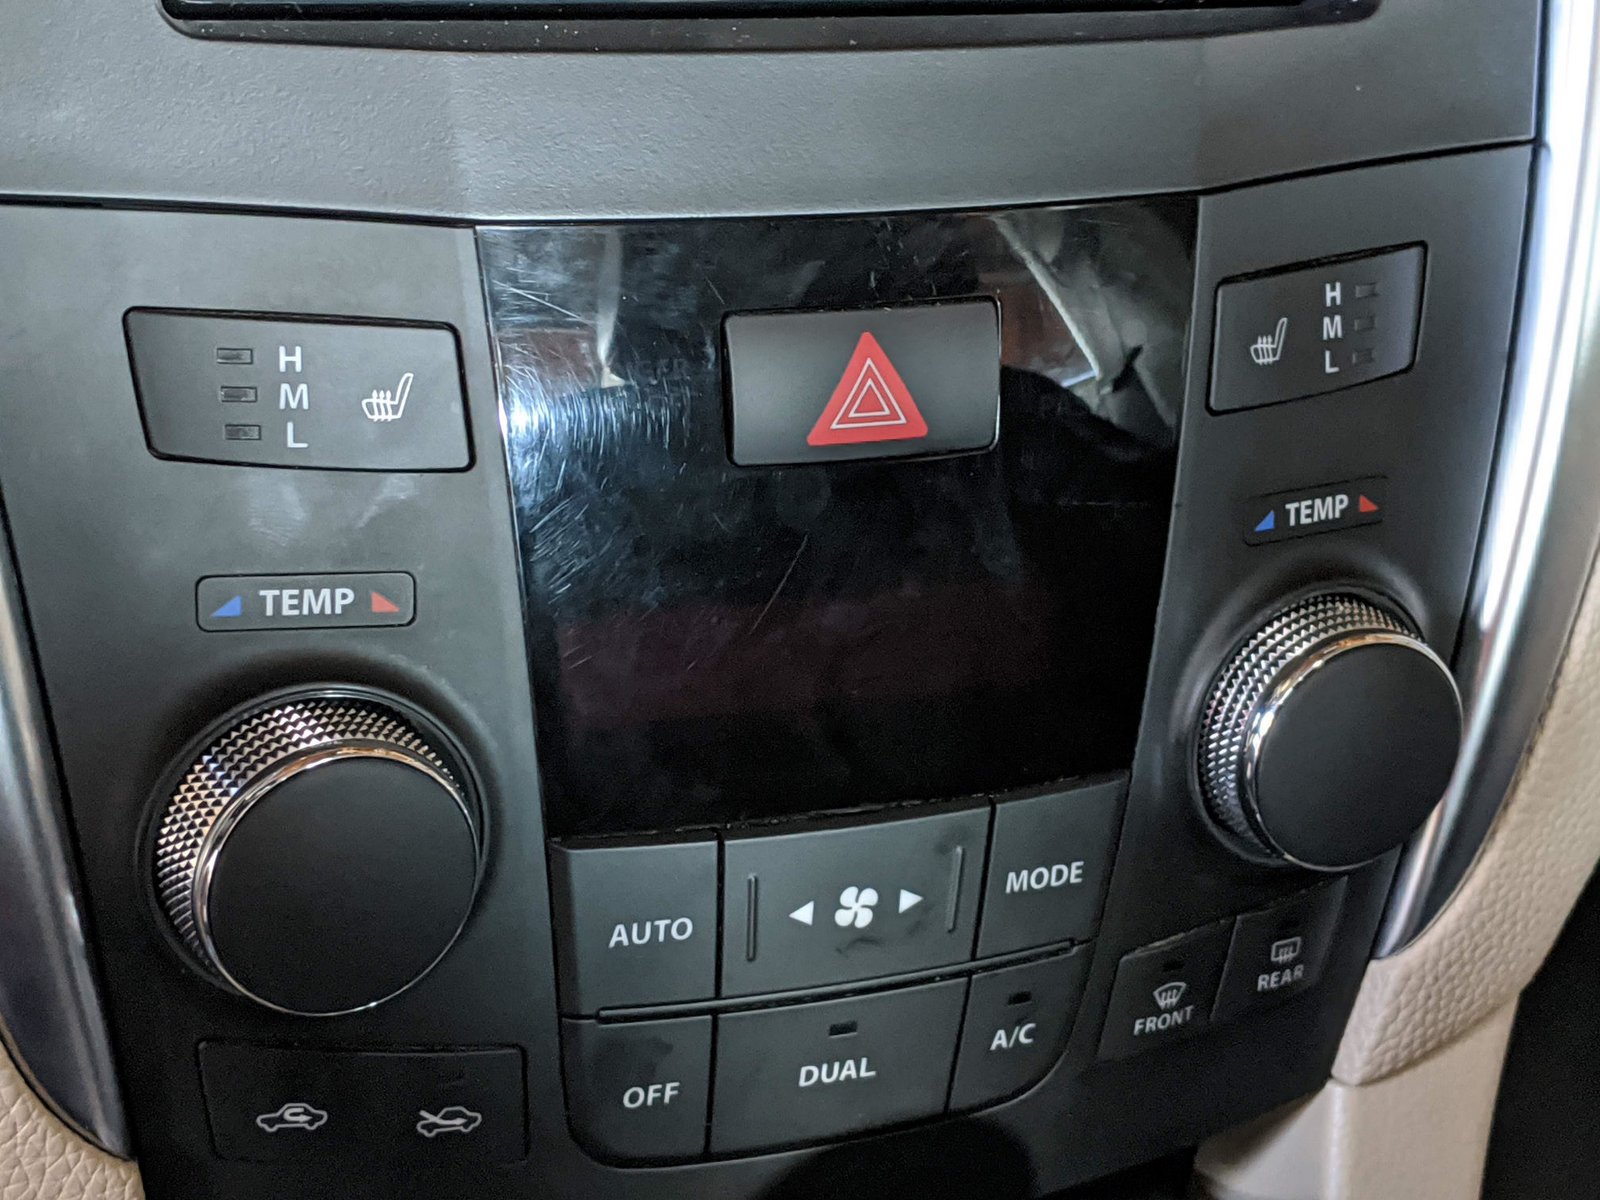 Climate panel with heated seat buttons